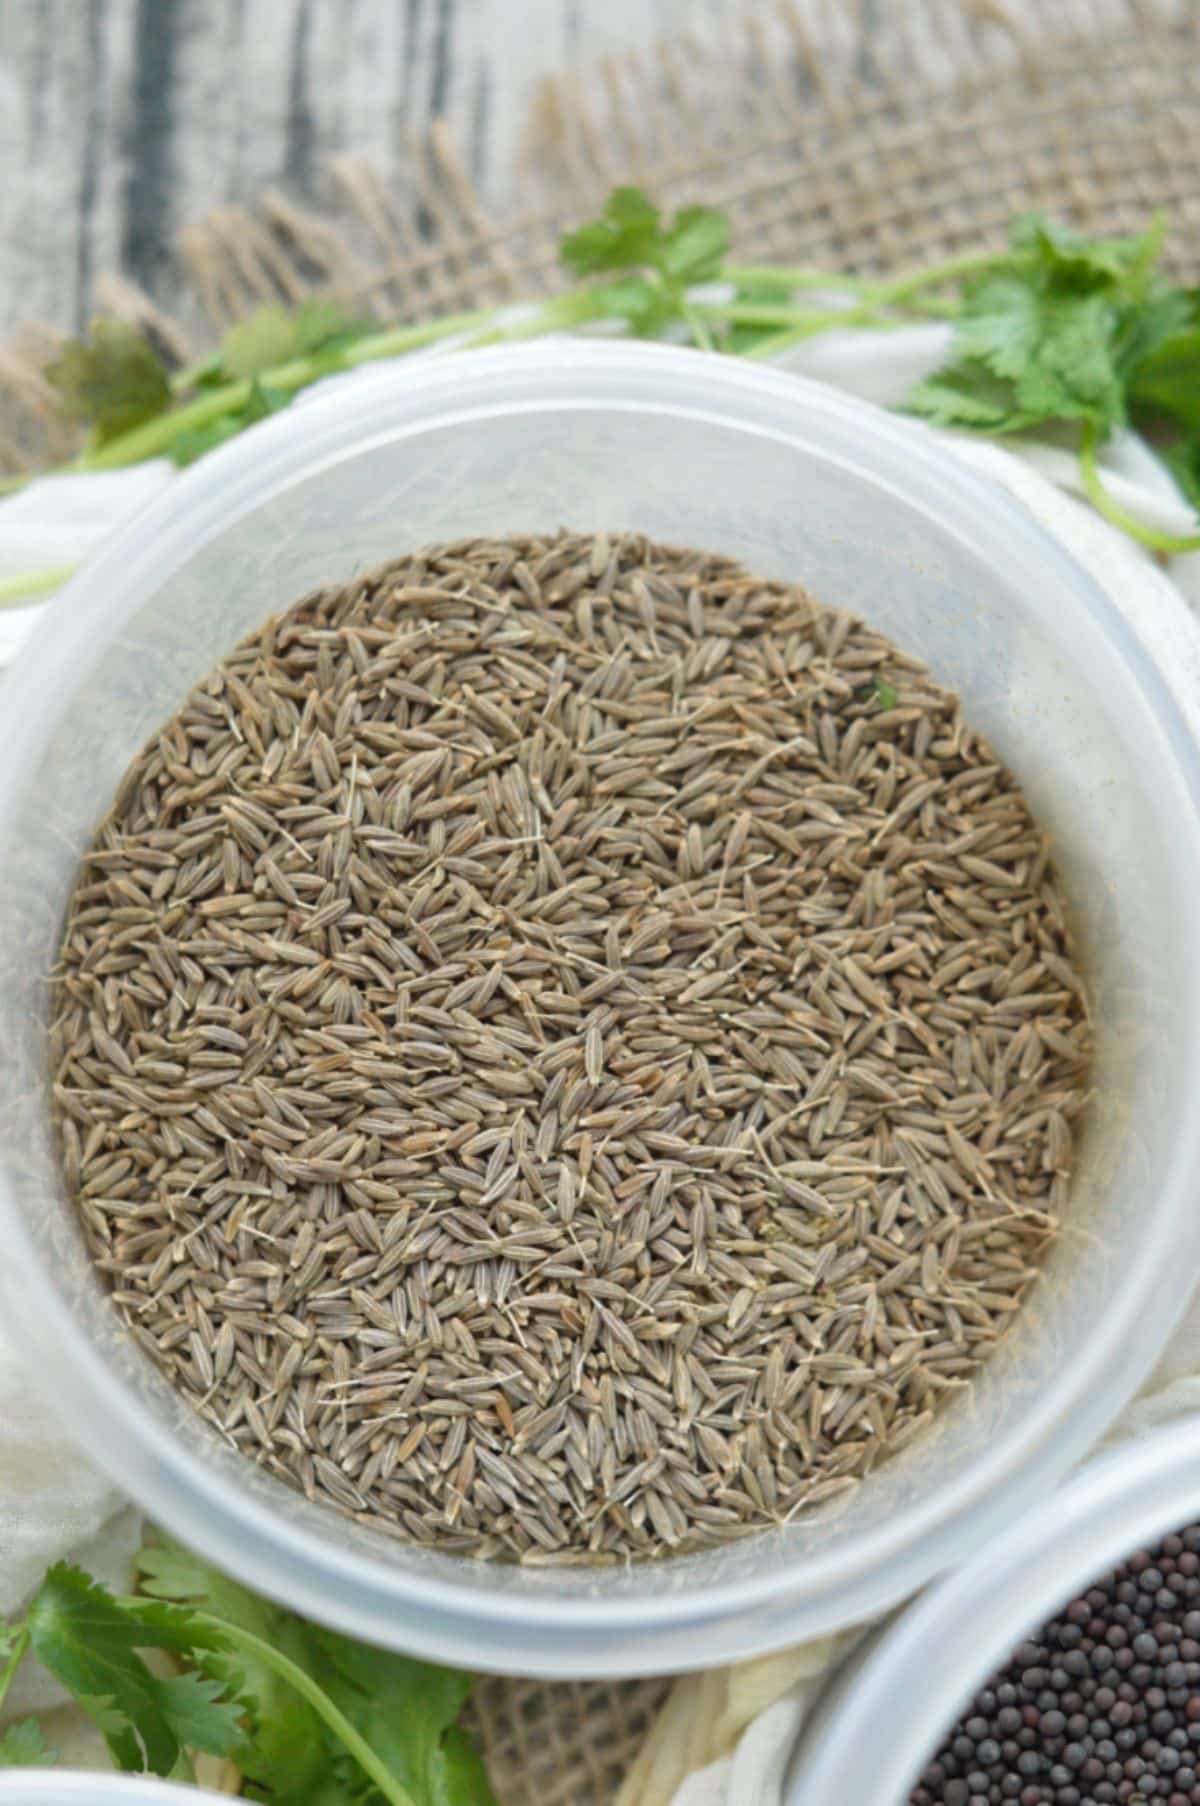 Cumin seeds in a plastic container.